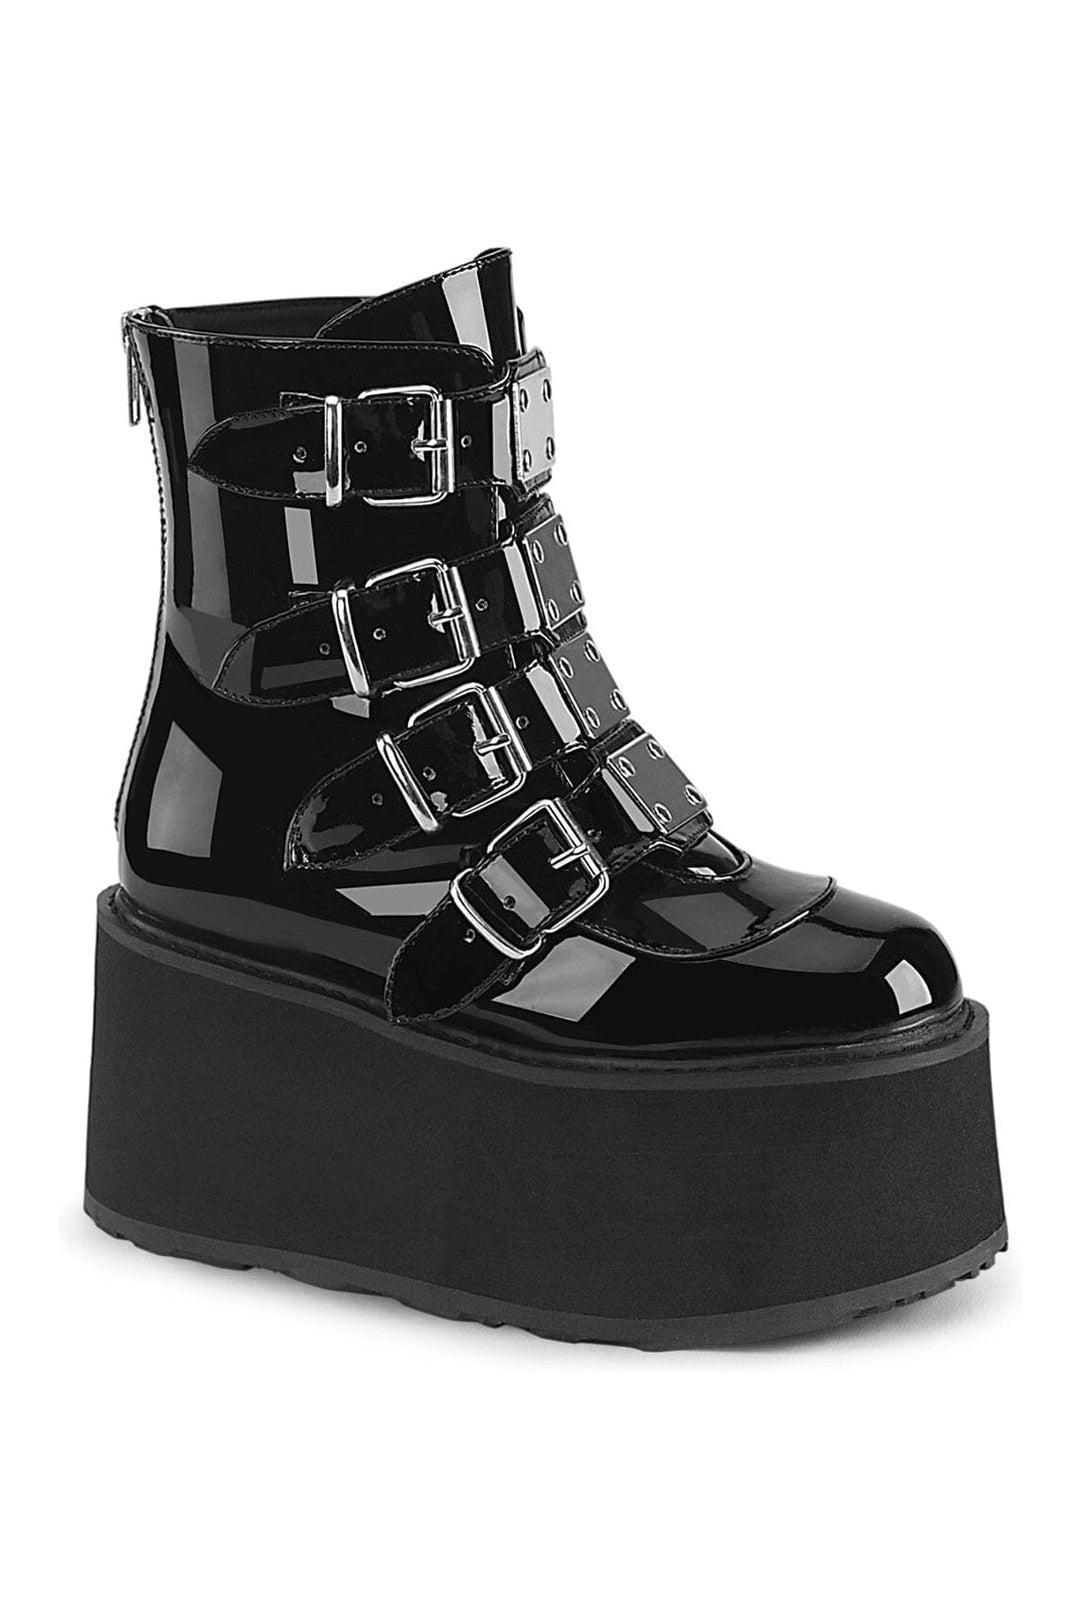 DAMNED-105 Black Patent Ankle Boot-Ankle Boots-Demonia-Black-10-Patent-SEXYSHOES.COM